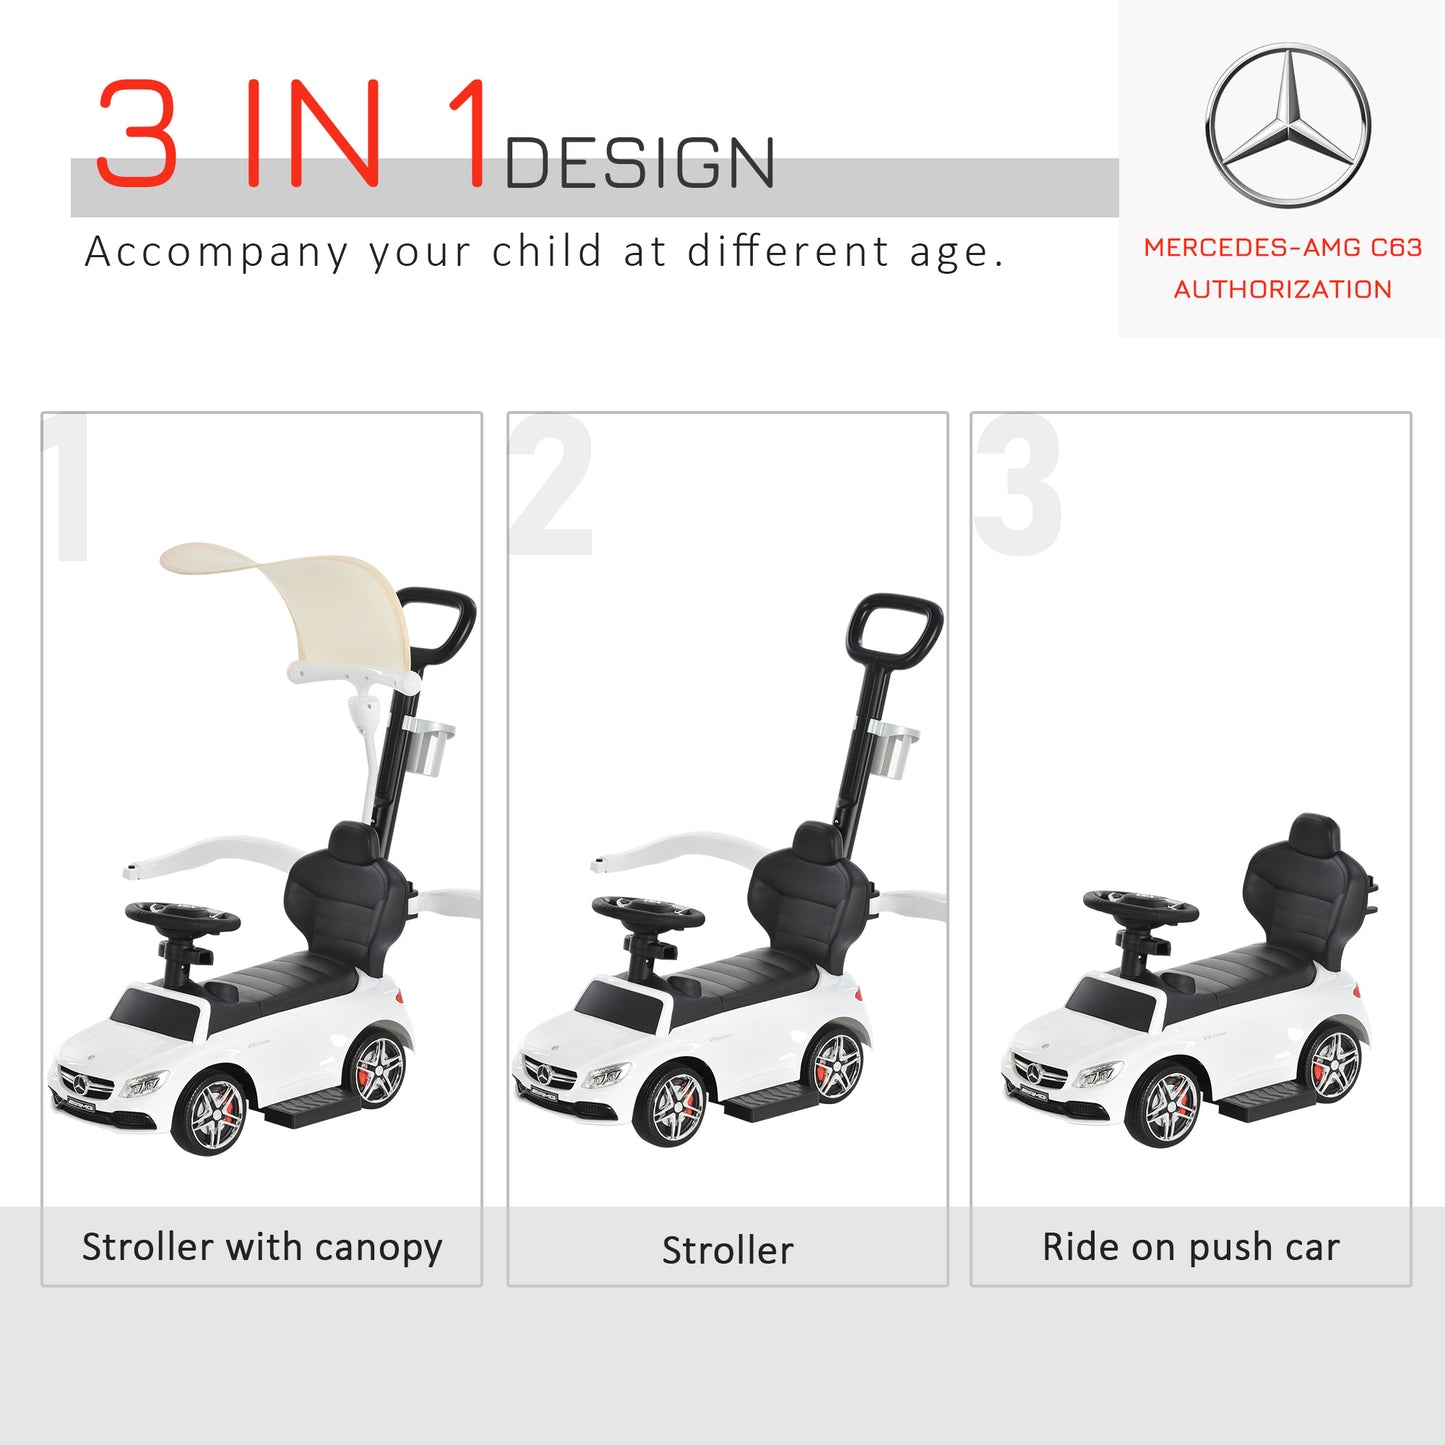 HOMCOM 3 in 1 Ride On Push Along Car Mercedes Benz for Toddlers Stroller Sliding Walking Car with Horn Sound Safety Bar for 1-3 Years